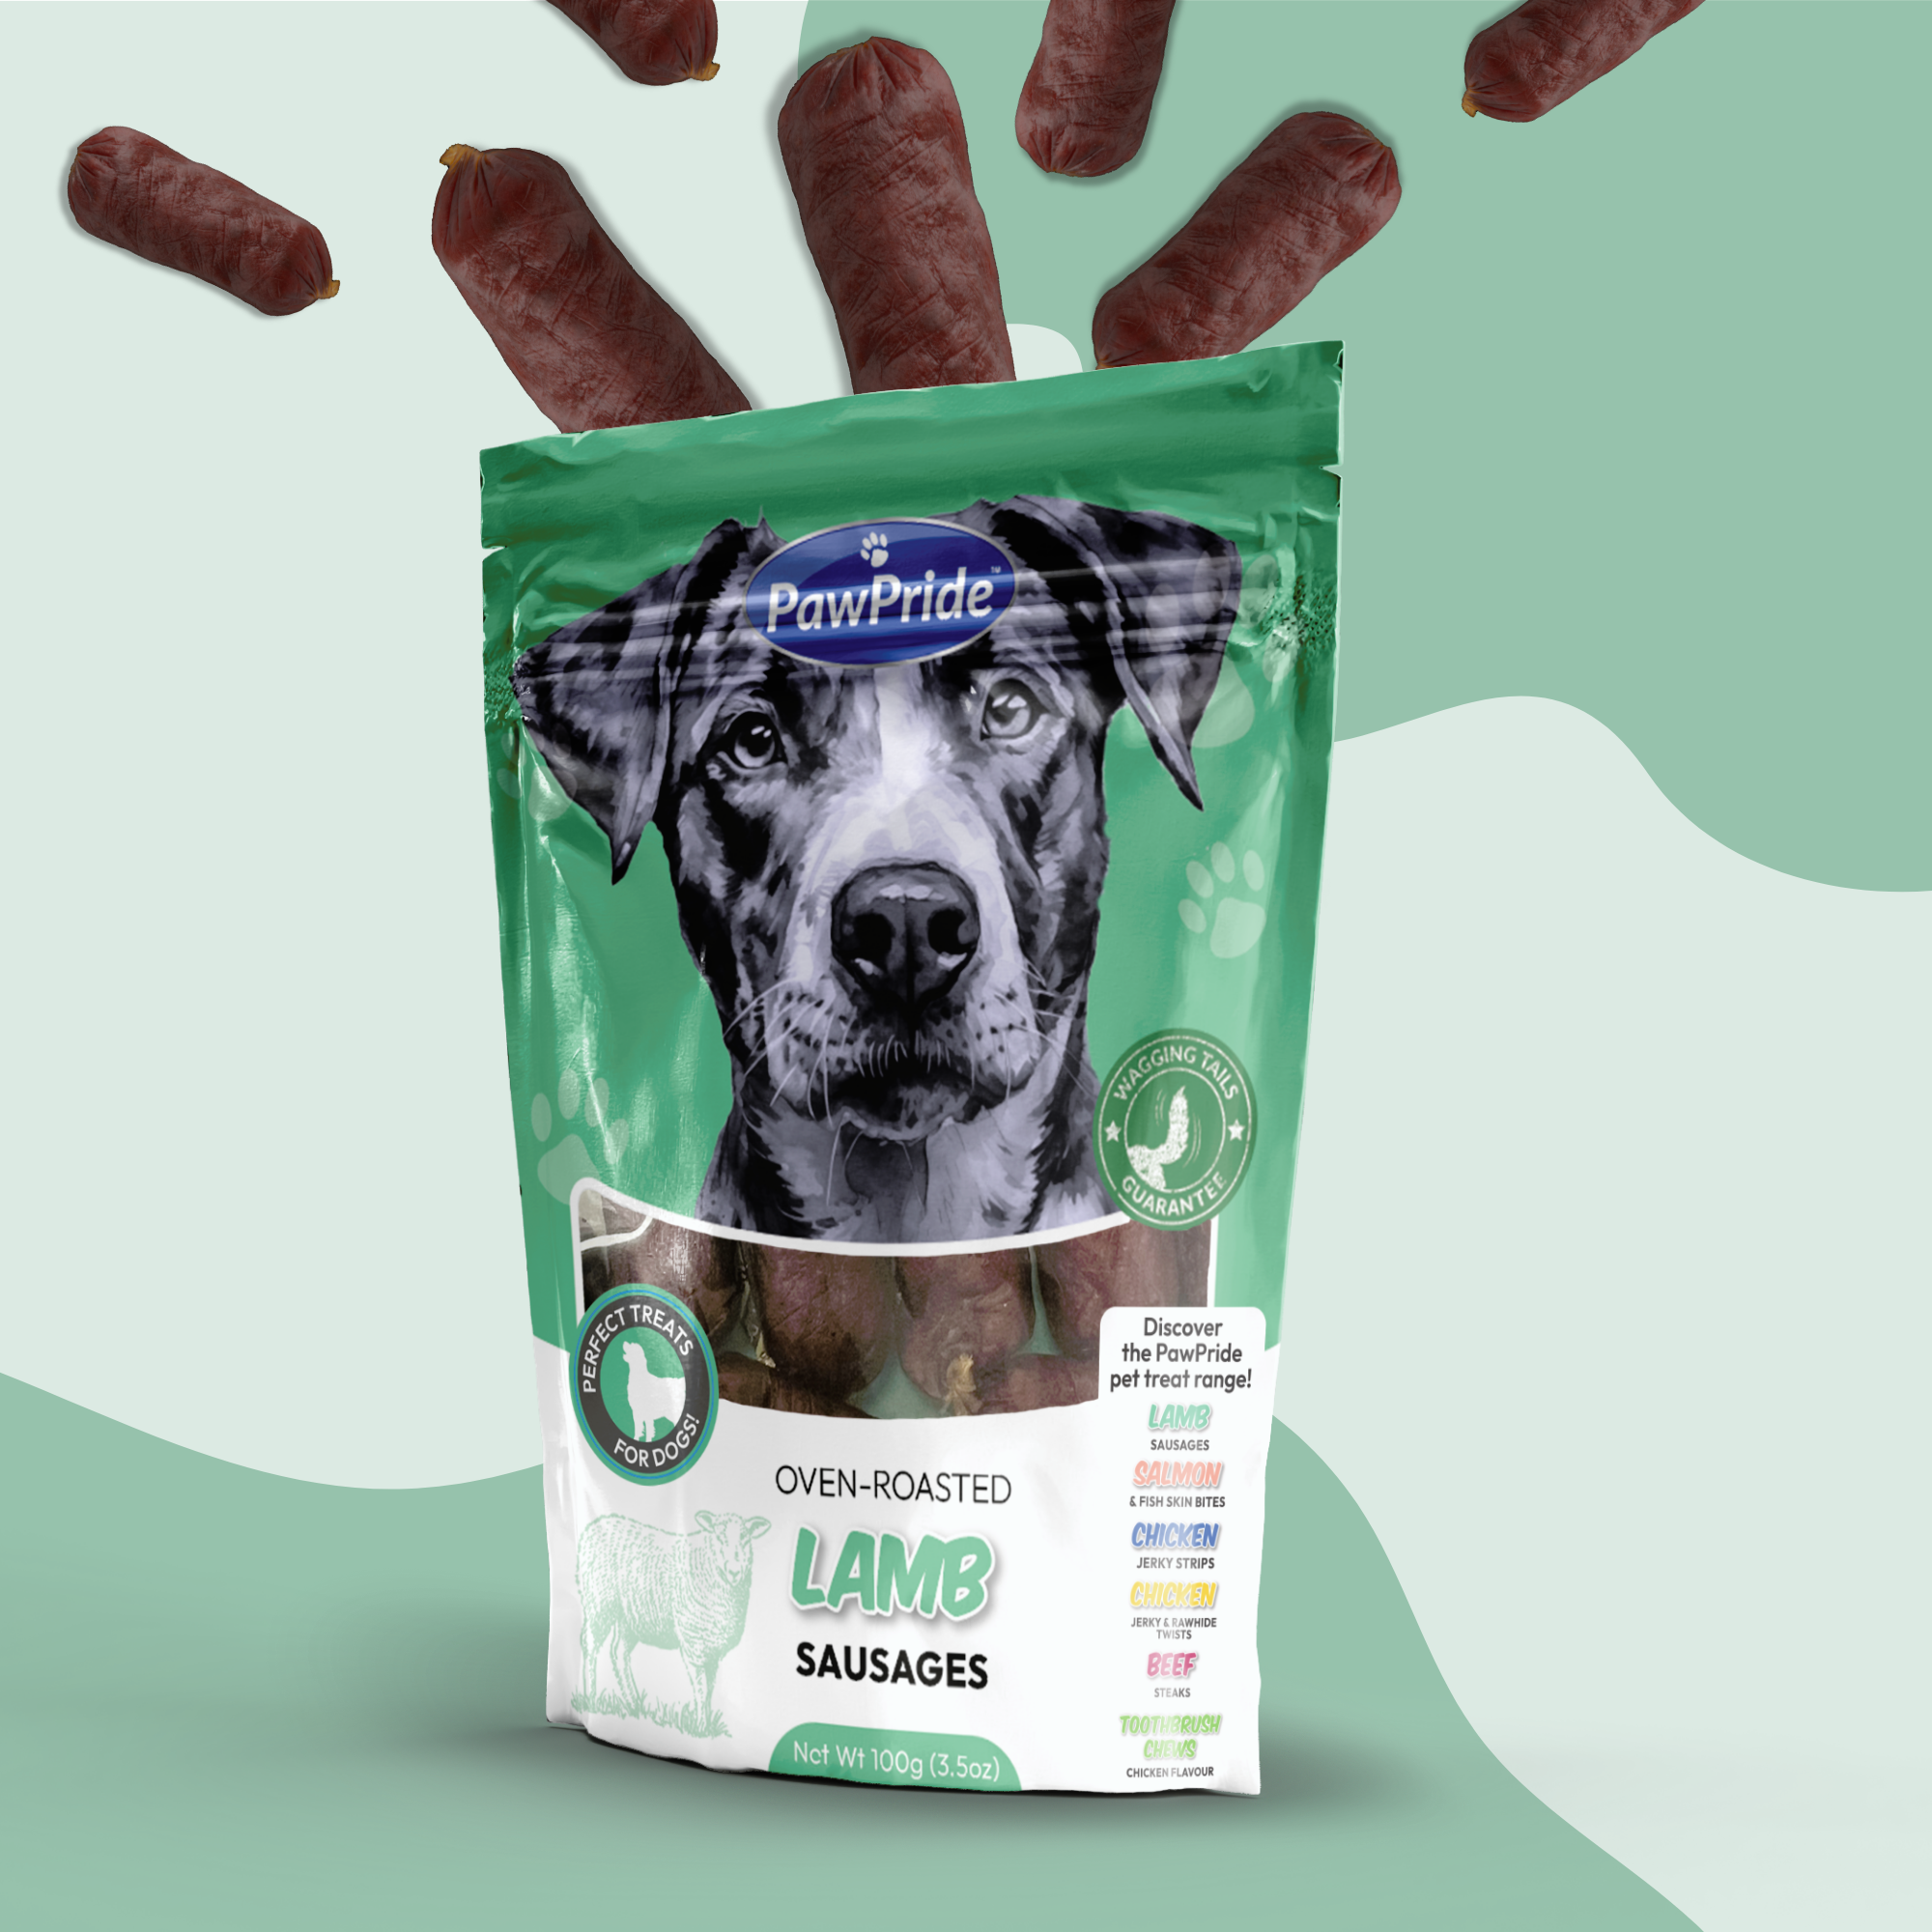 Lamb Sausages - Dog Treats from PawPride - DSL